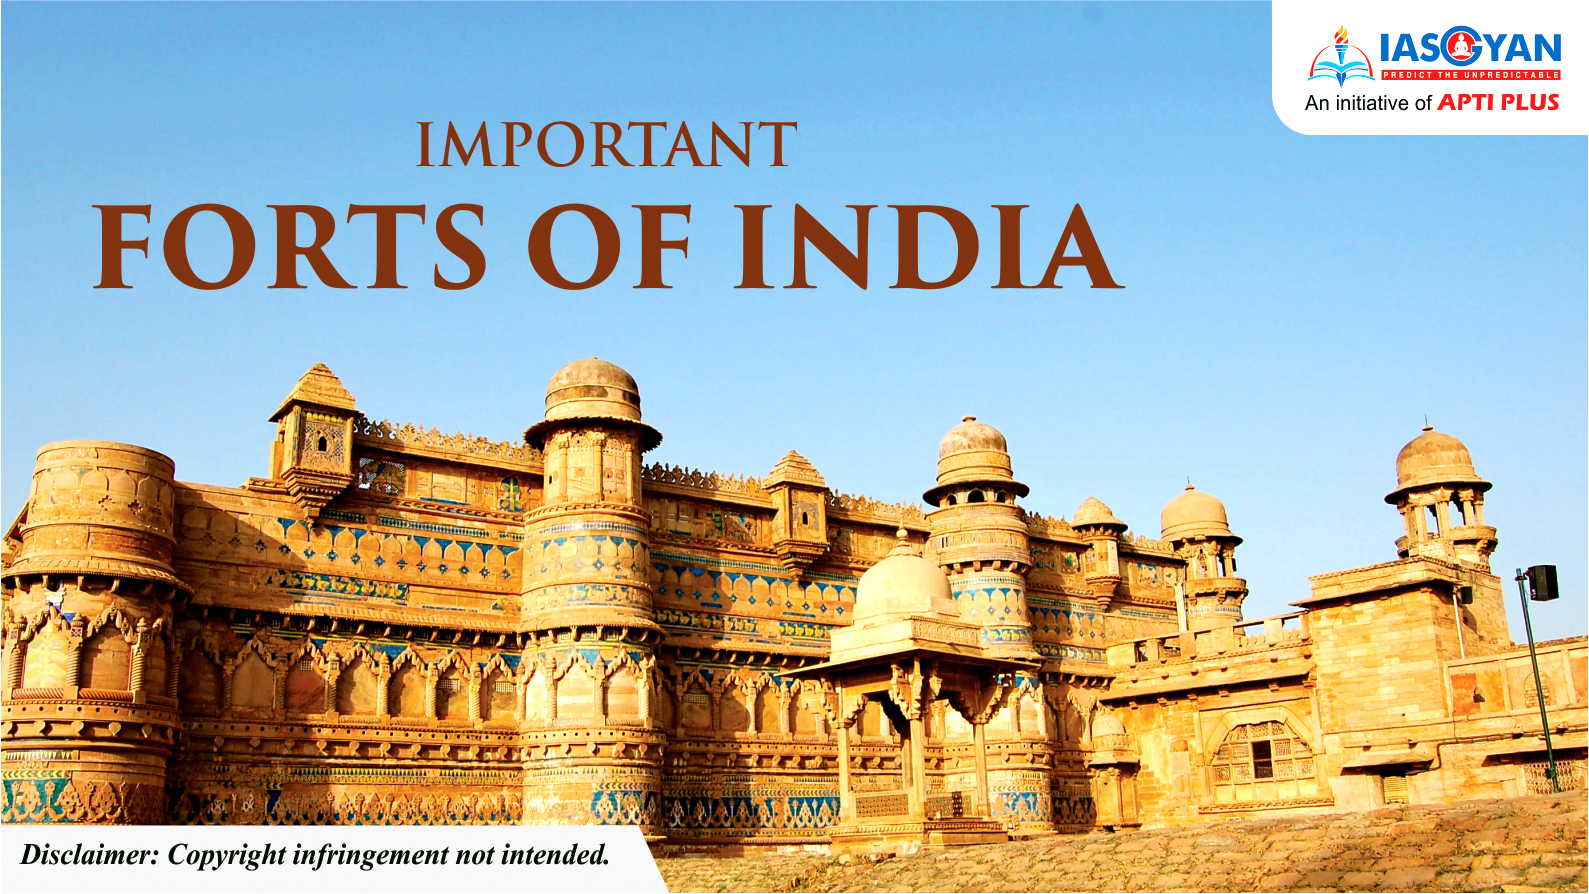 IMPORTANT FORTS OF INDIA